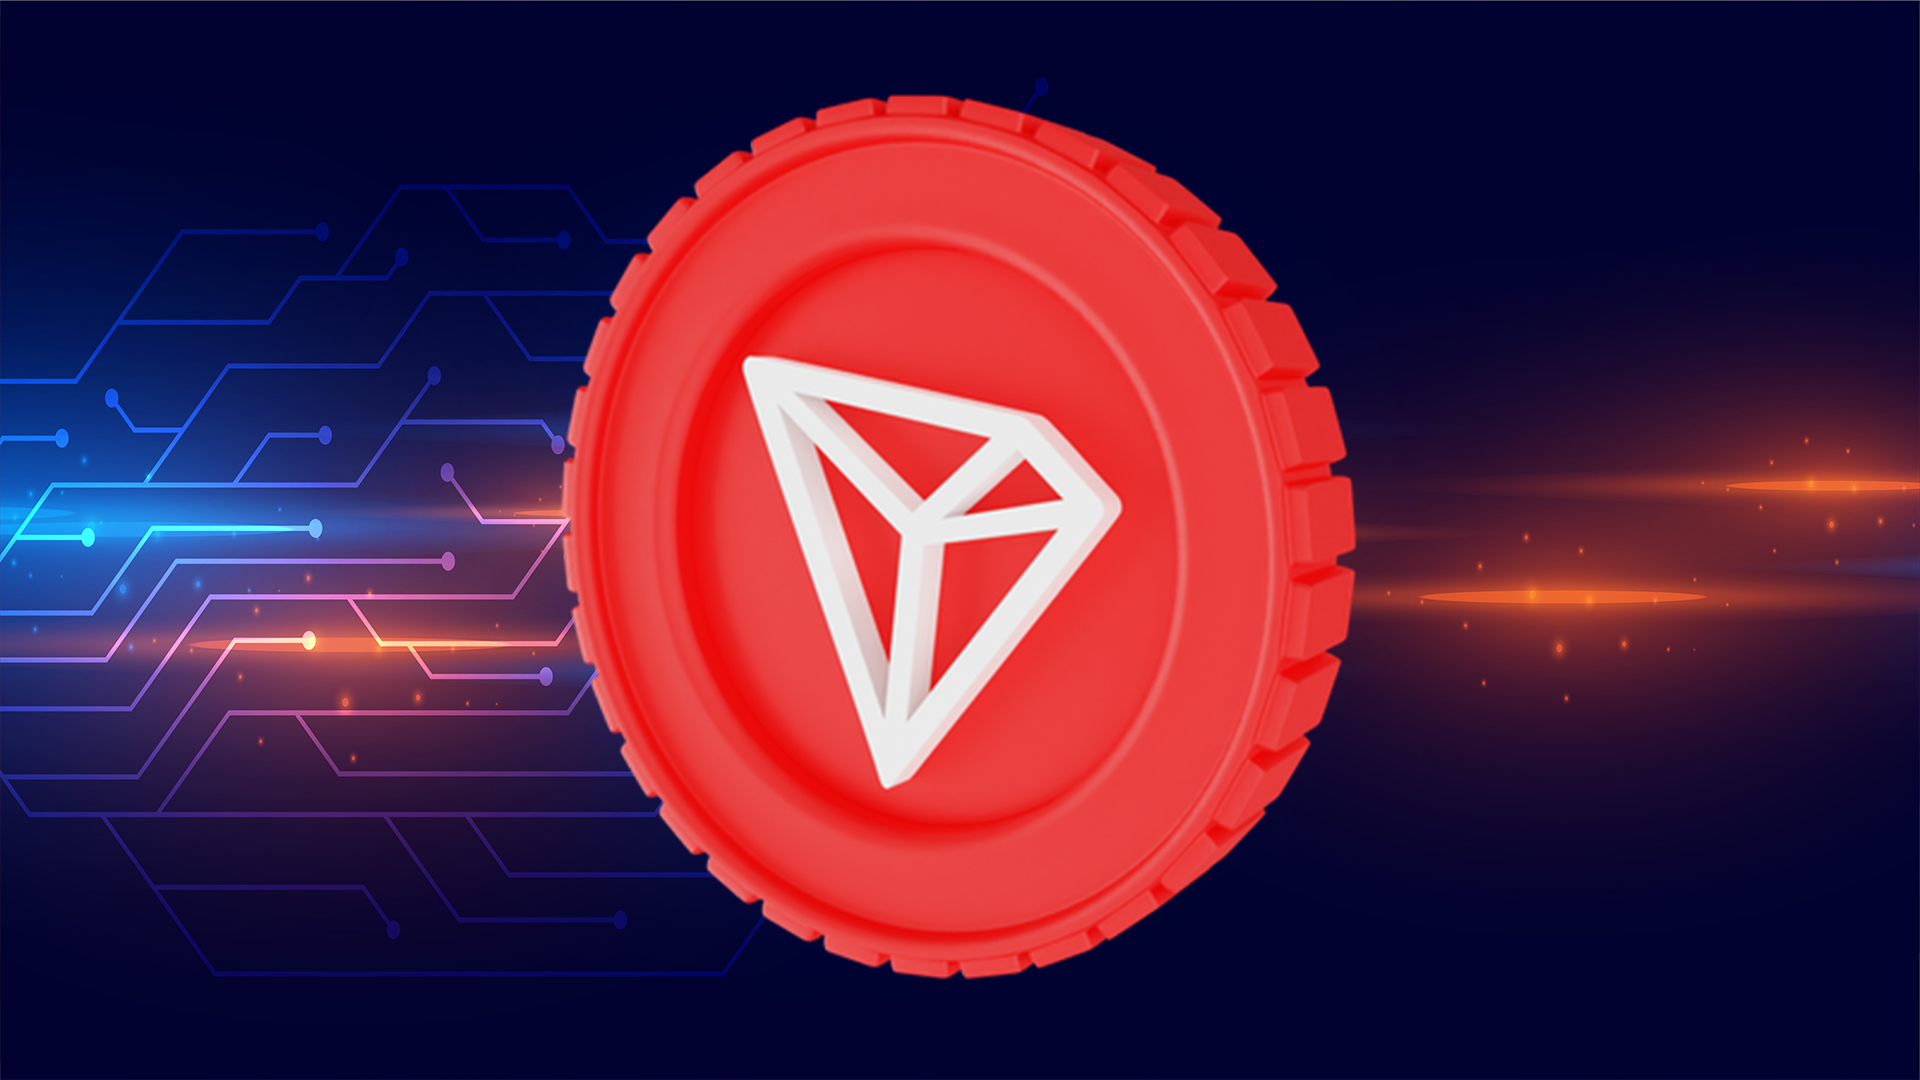 Tron Price and Chart — TRX to USD — TradingView — India